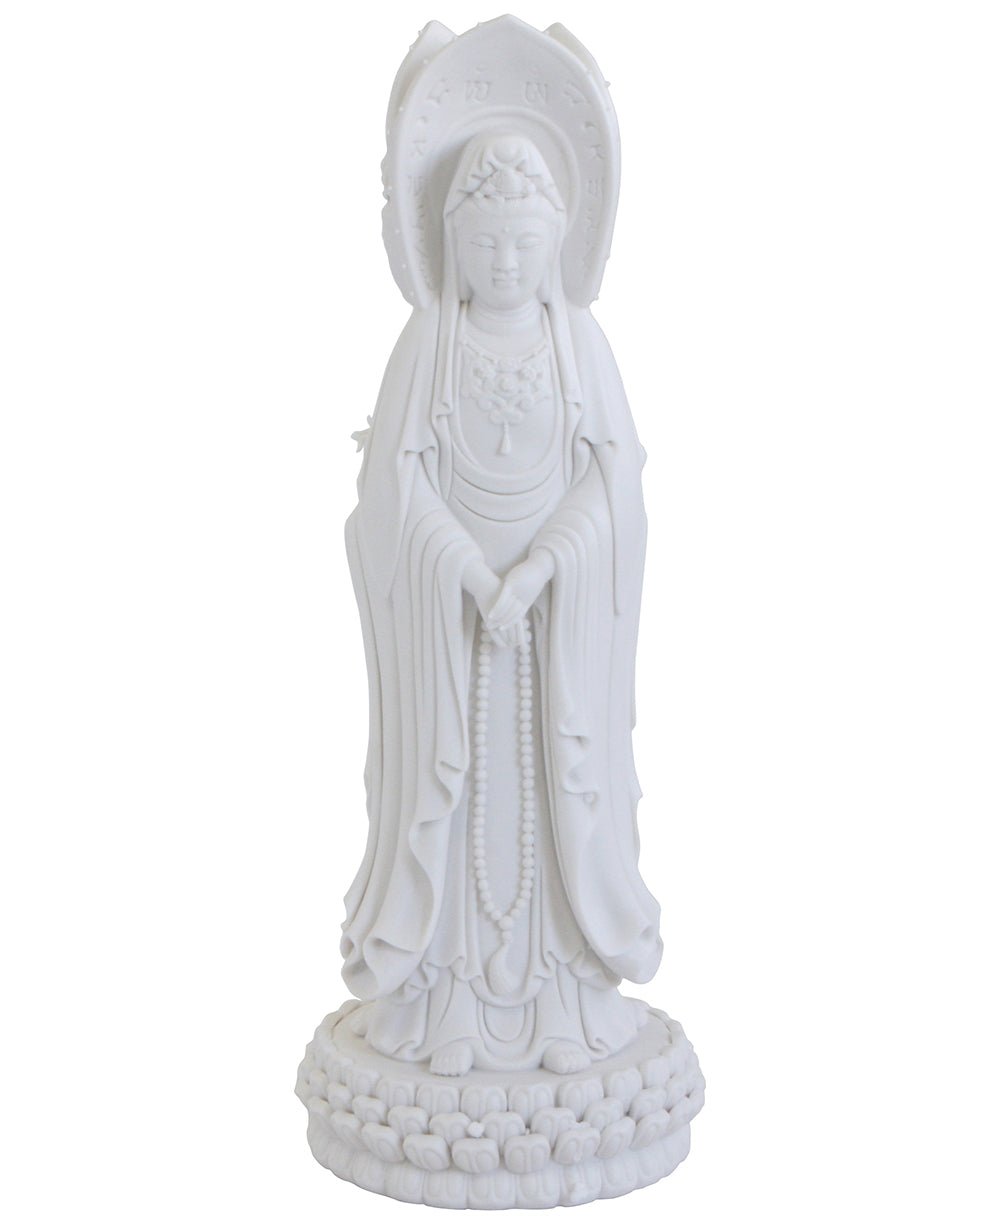 Three-Sided Porcelain Kuan Yin Statue - Sculptures & Statues